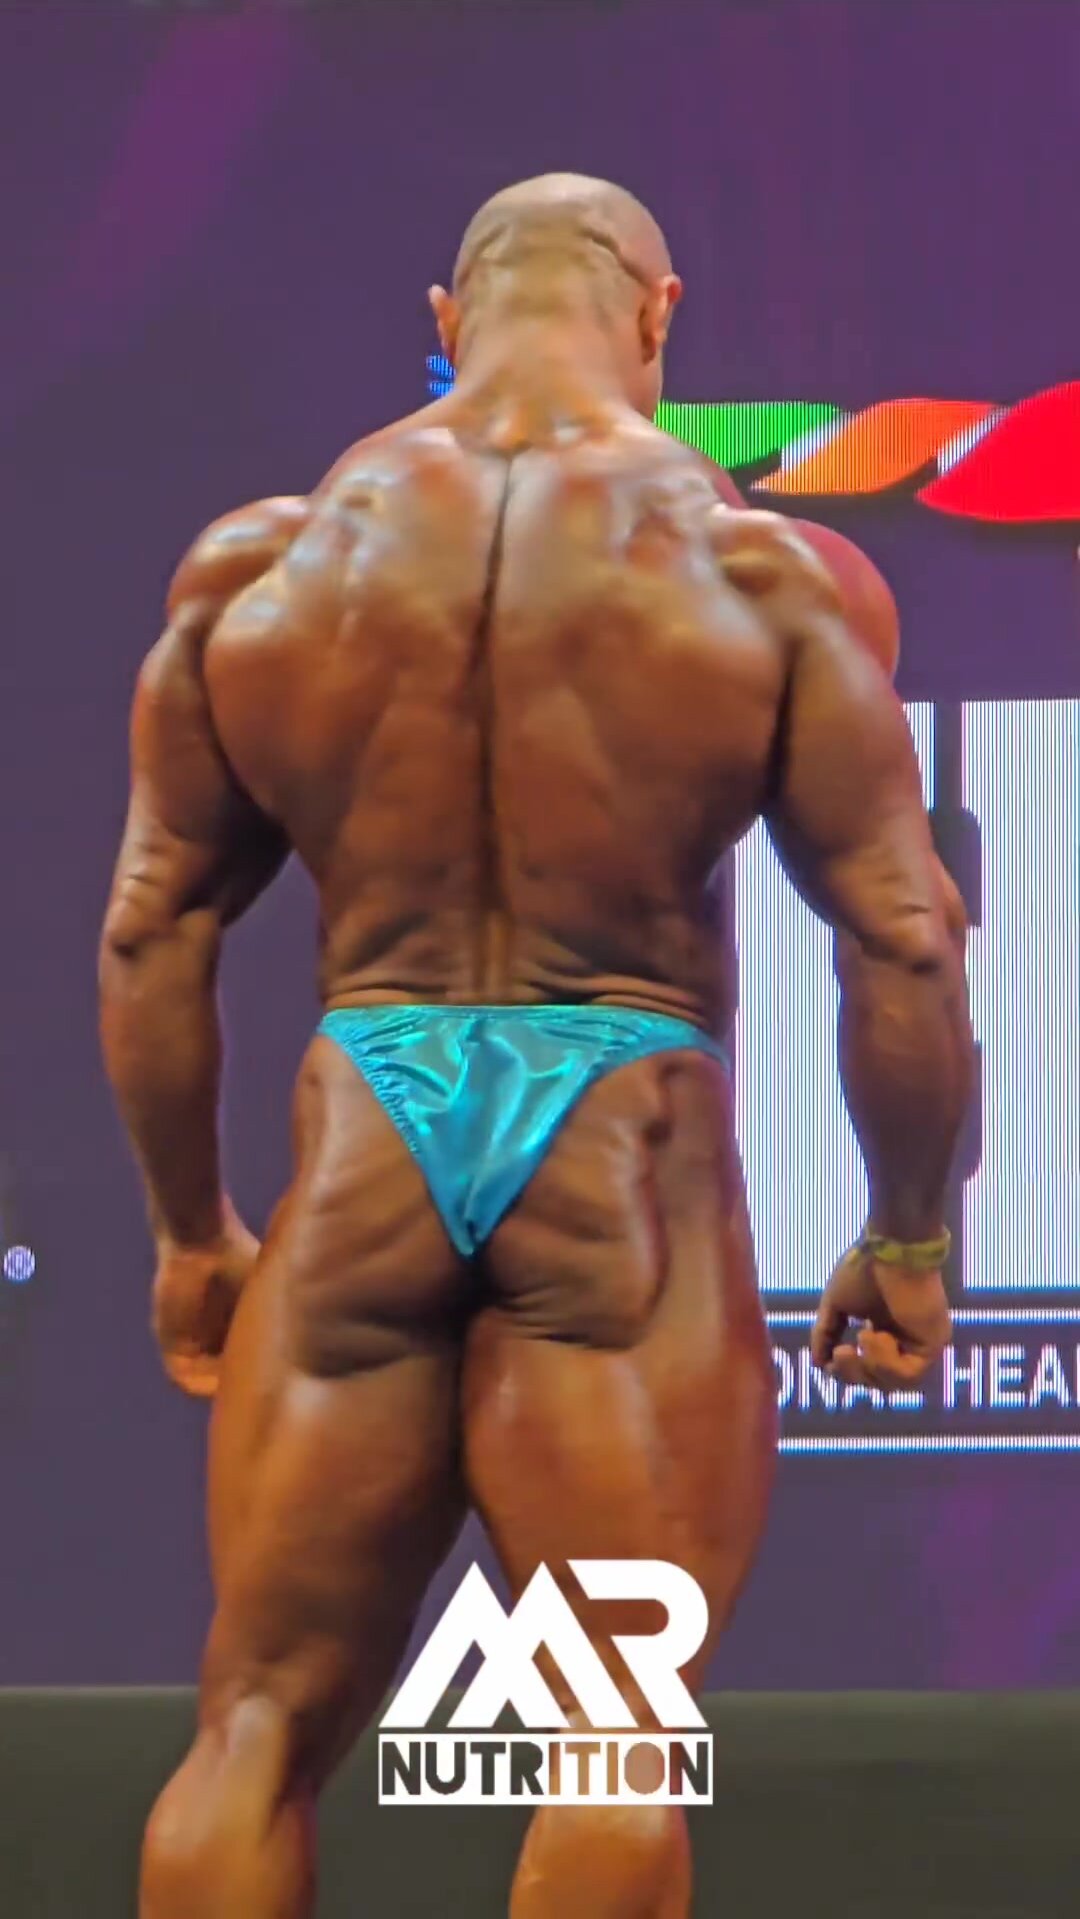 Arab Musclebull competing